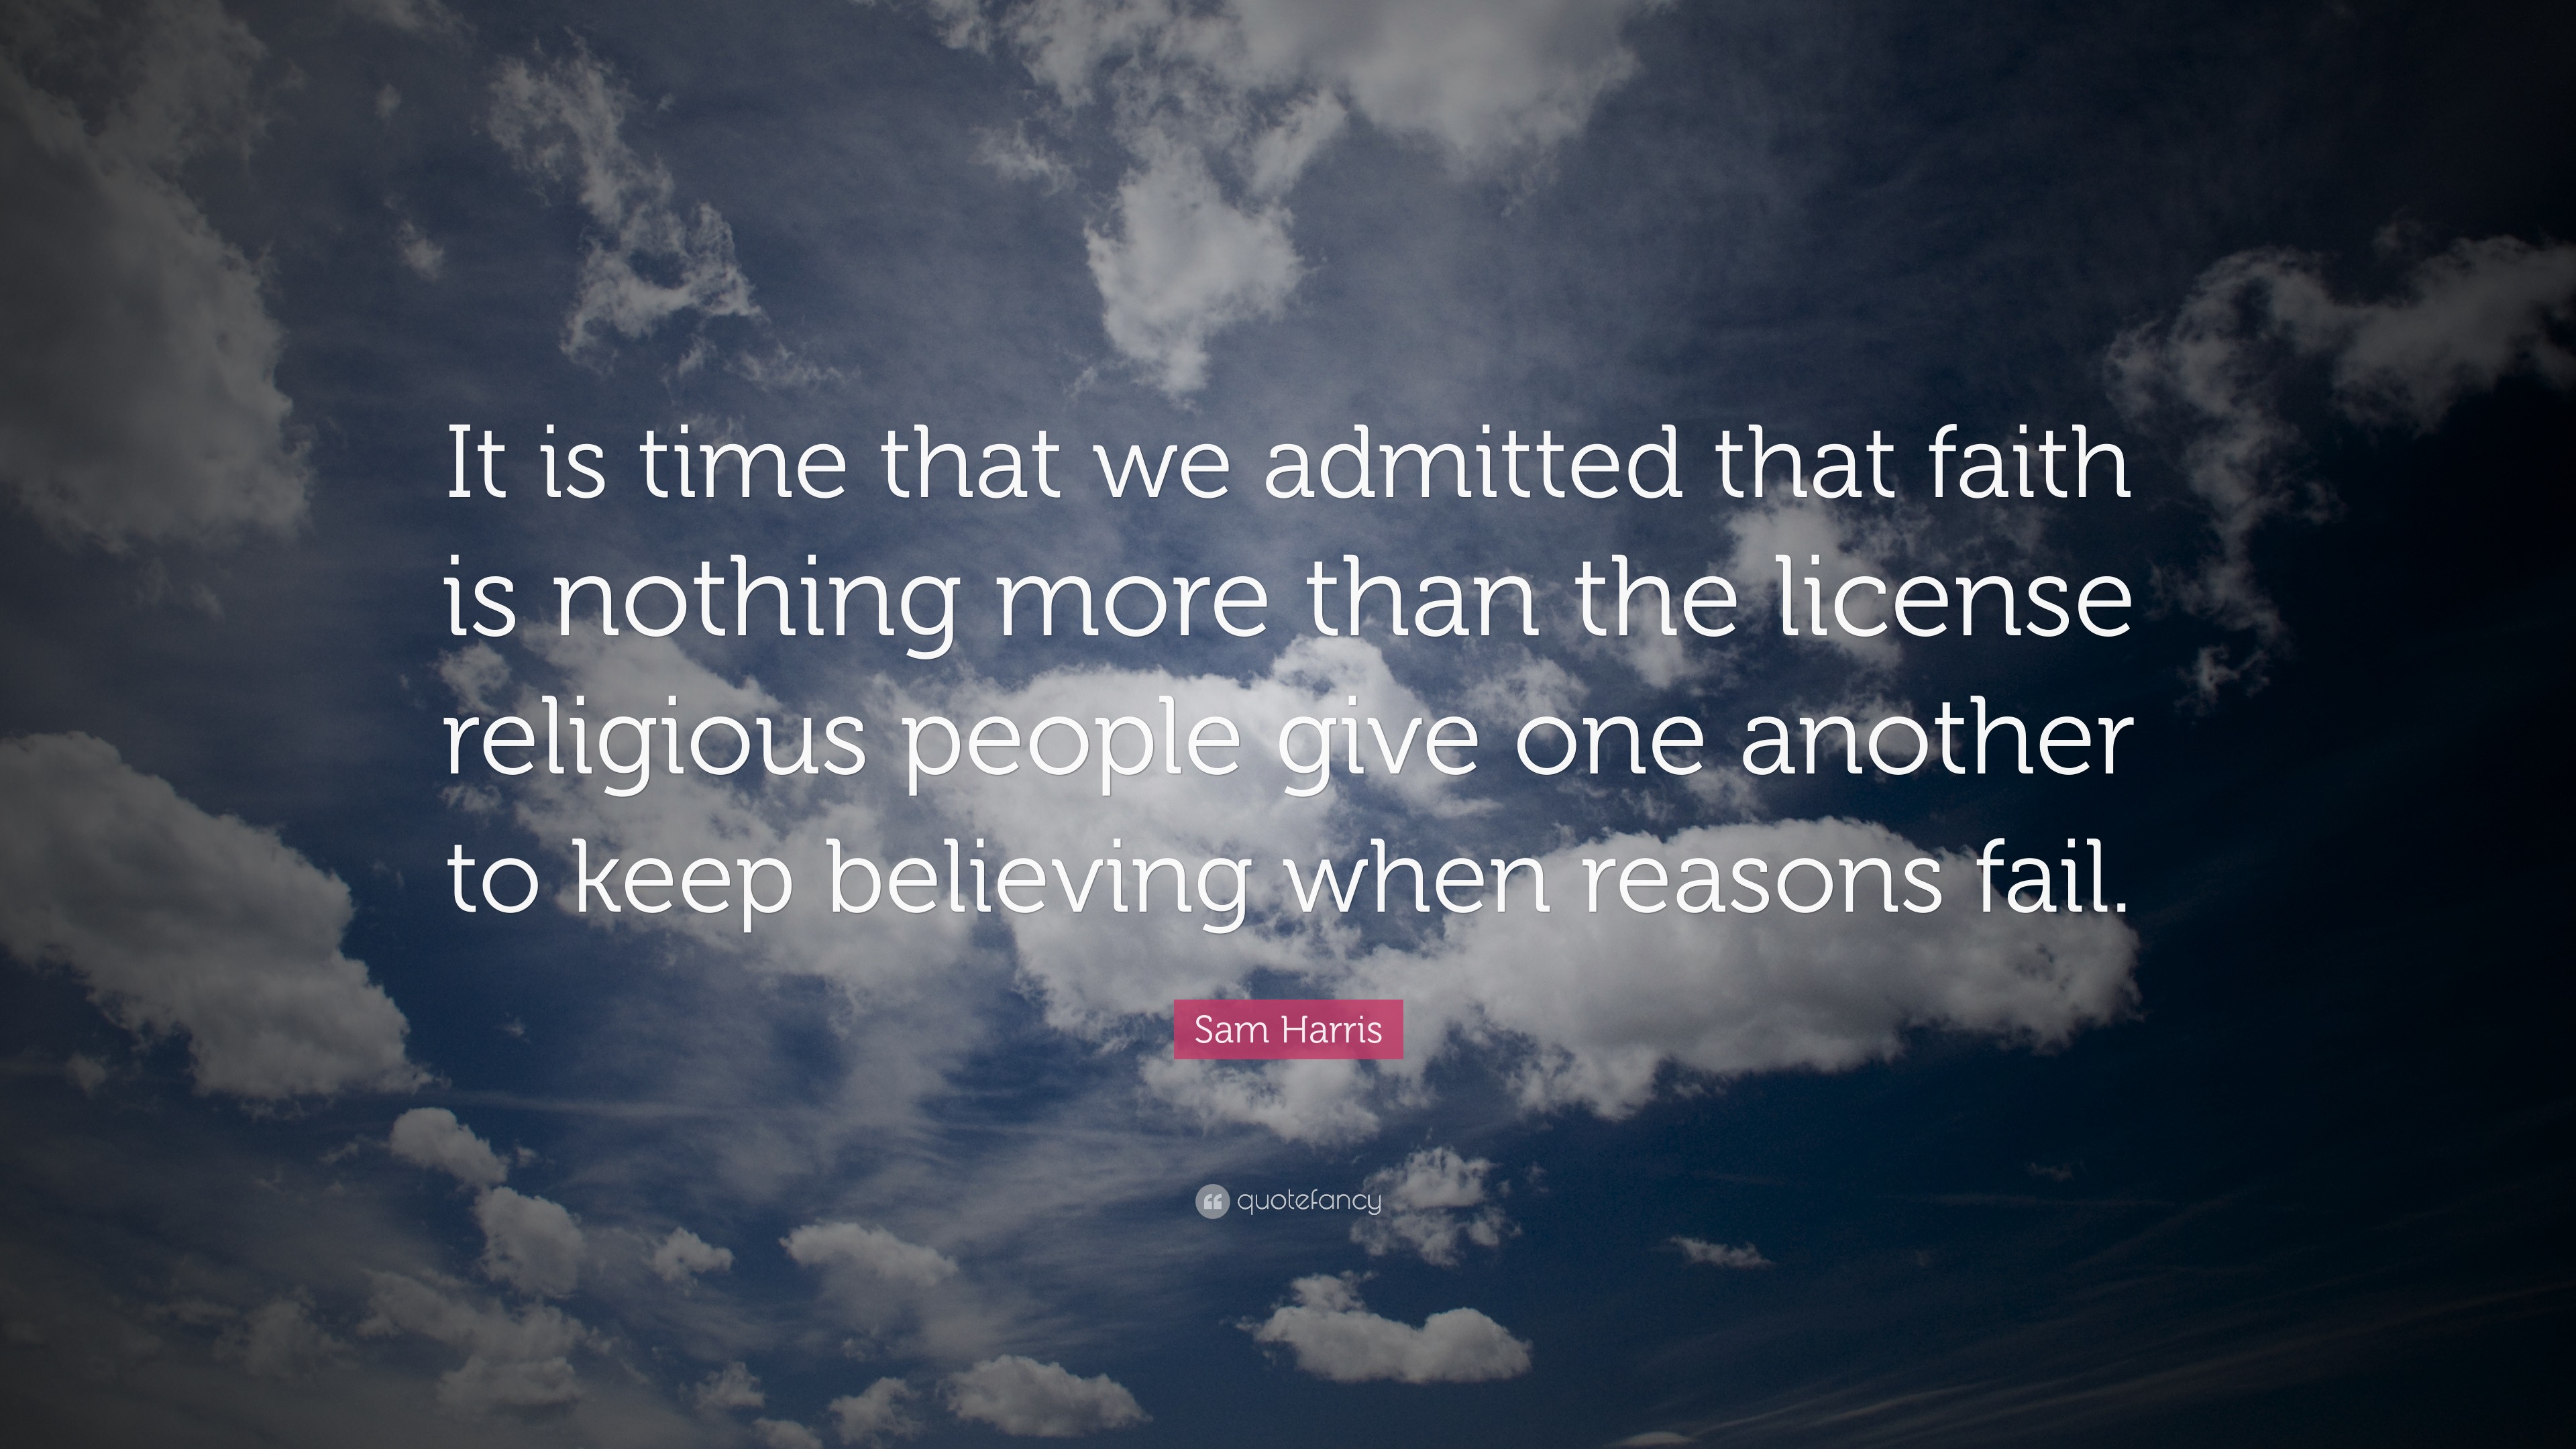 Sam Harris Quote It Is Time That We Admitted That Faith Is Nothing More Than The License Religious People Give One Another To Keep Believ 7 Wallpapers Quotefancy